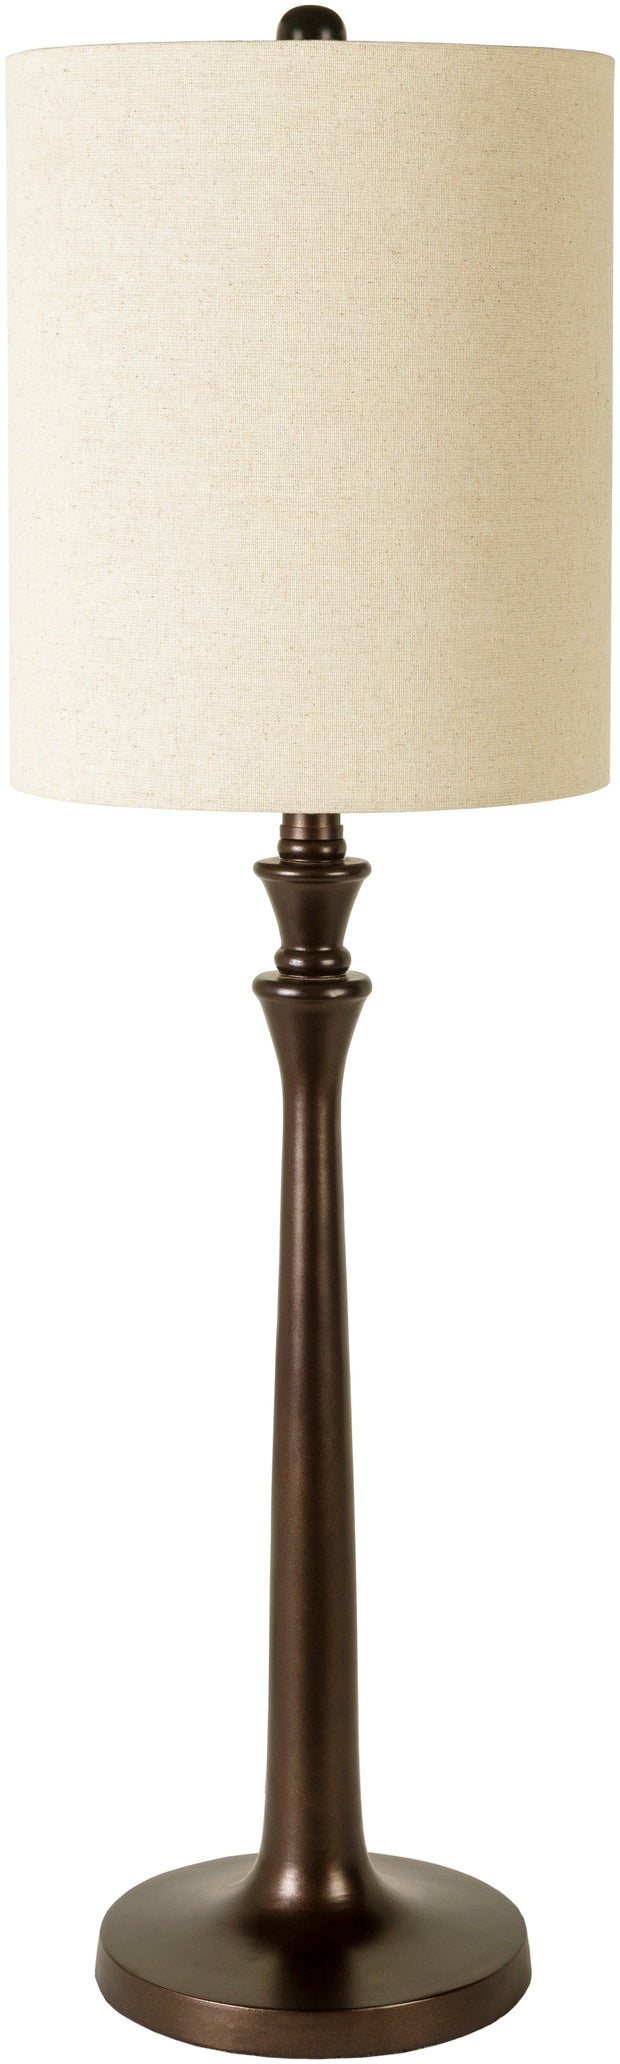 bettiny table lamps by surya bti 001 1